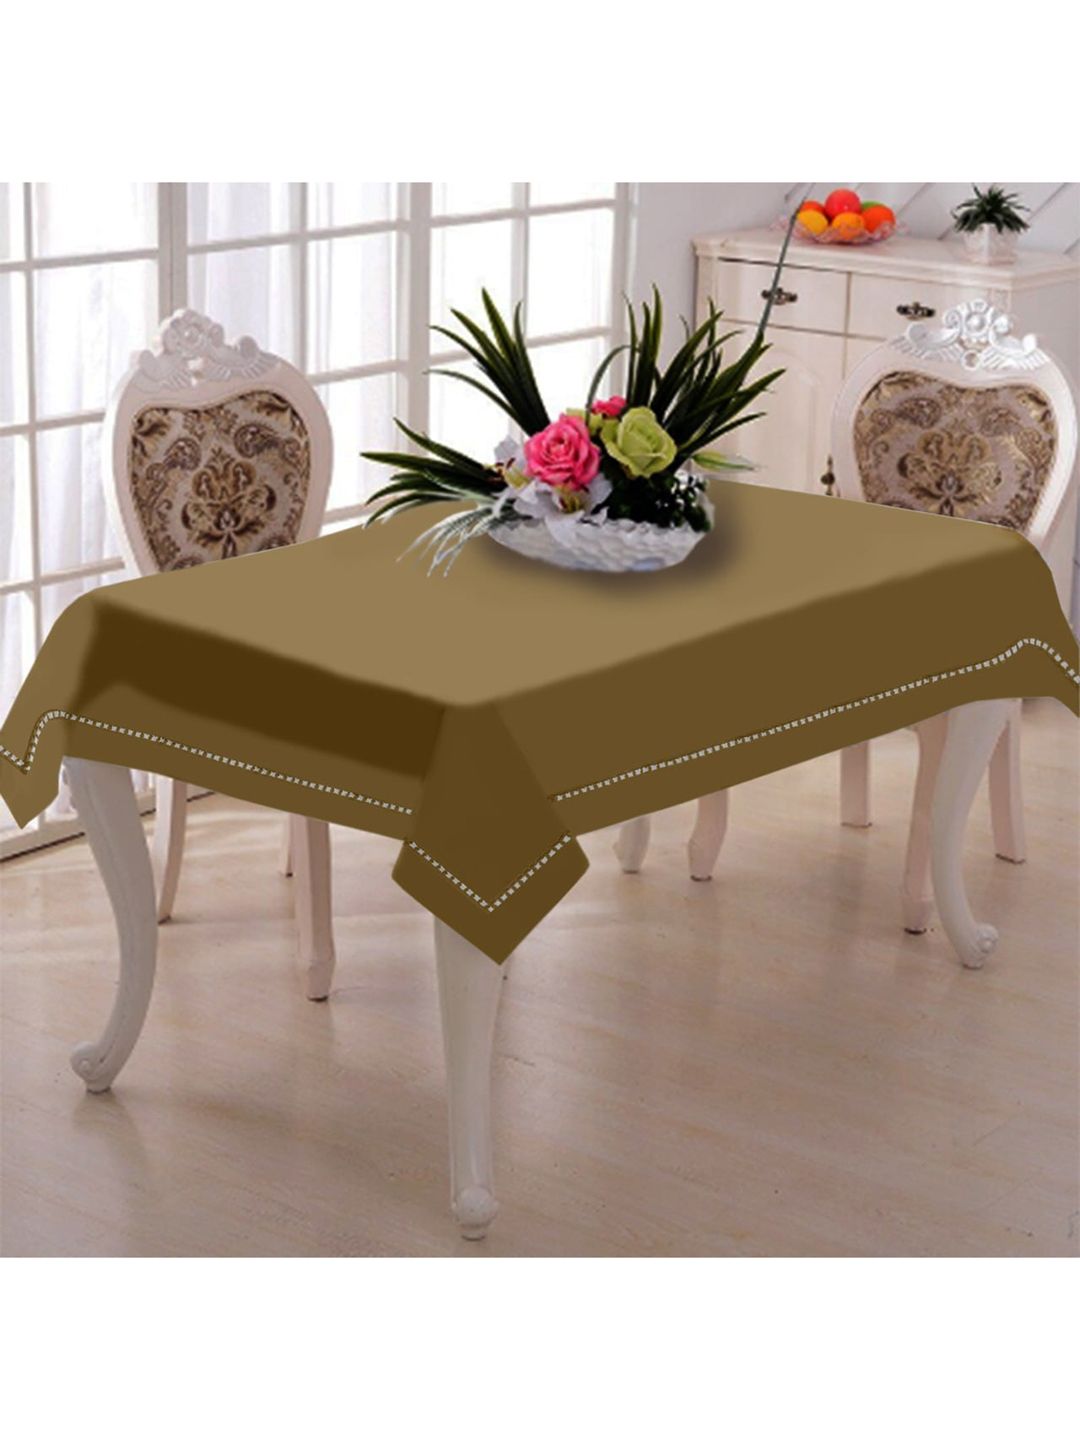 Lushomes Unisex Beige & White Solid Pure Cotton 6-Seater Table Cover Price in India